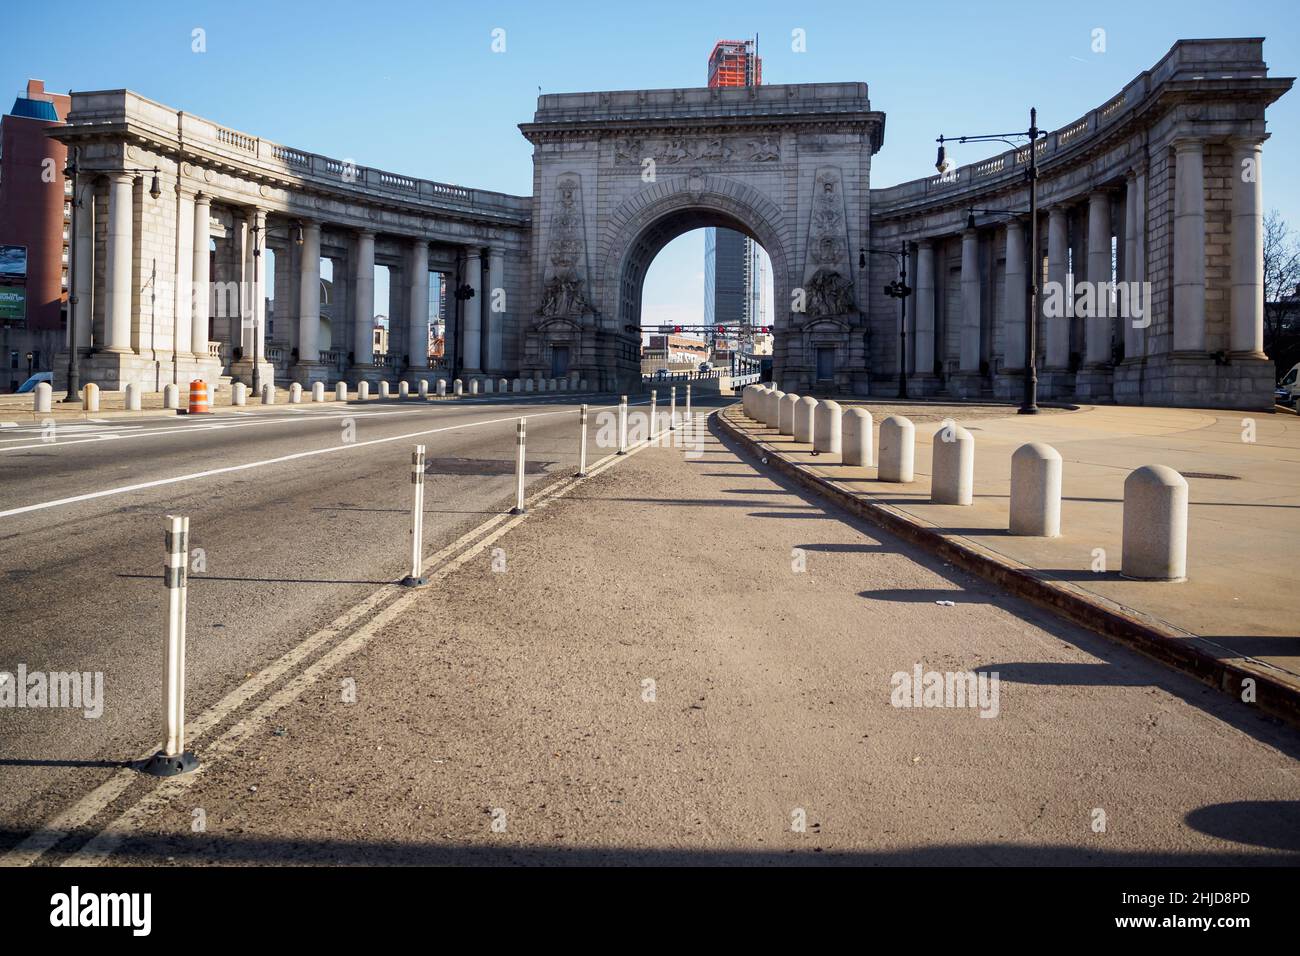 Manhattan Bridge Arch and Colonnade on a sunny day in New York, NYC Stock Photo